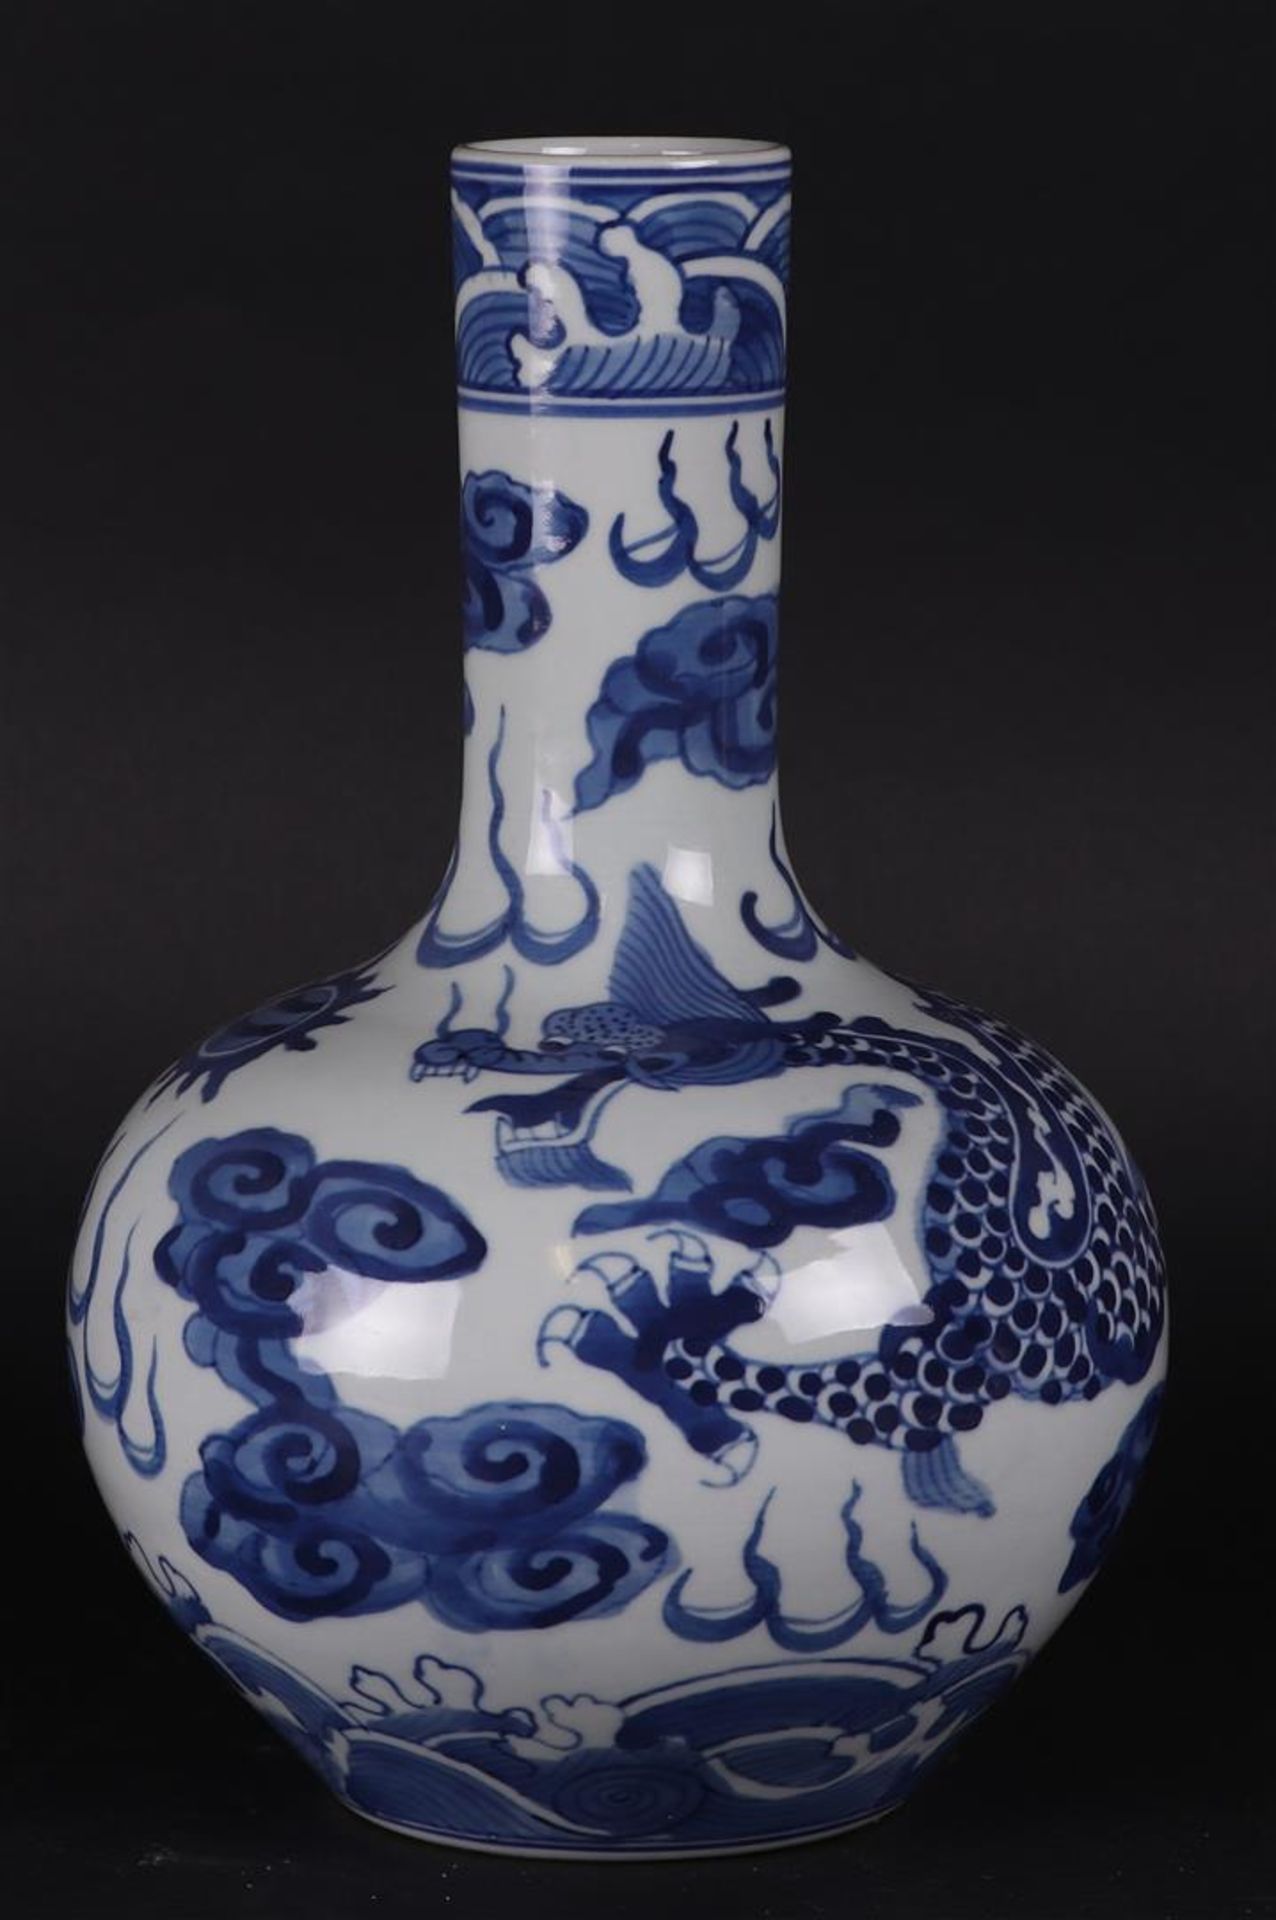 A porcelain stem vase with dragon decor, marked Xuande. China, late 20th century.